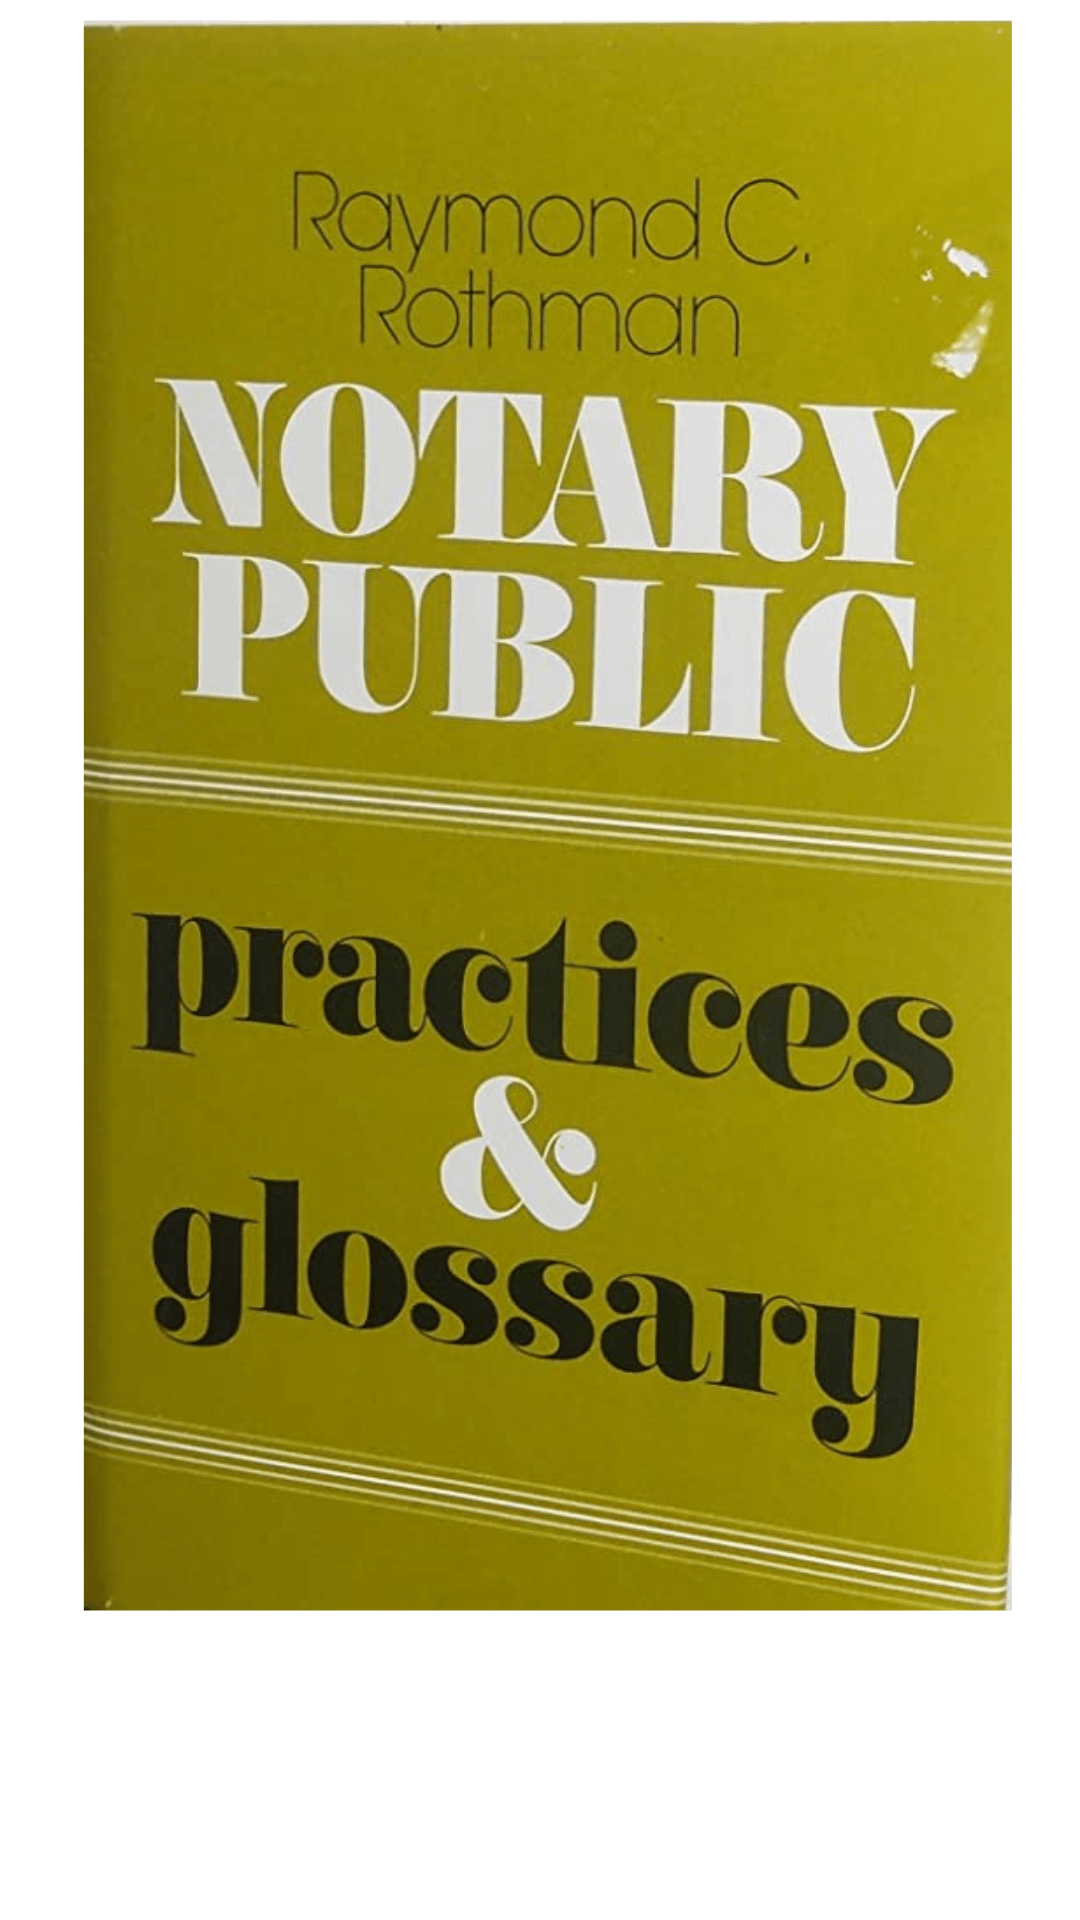 Notary Public Practices and Glossary